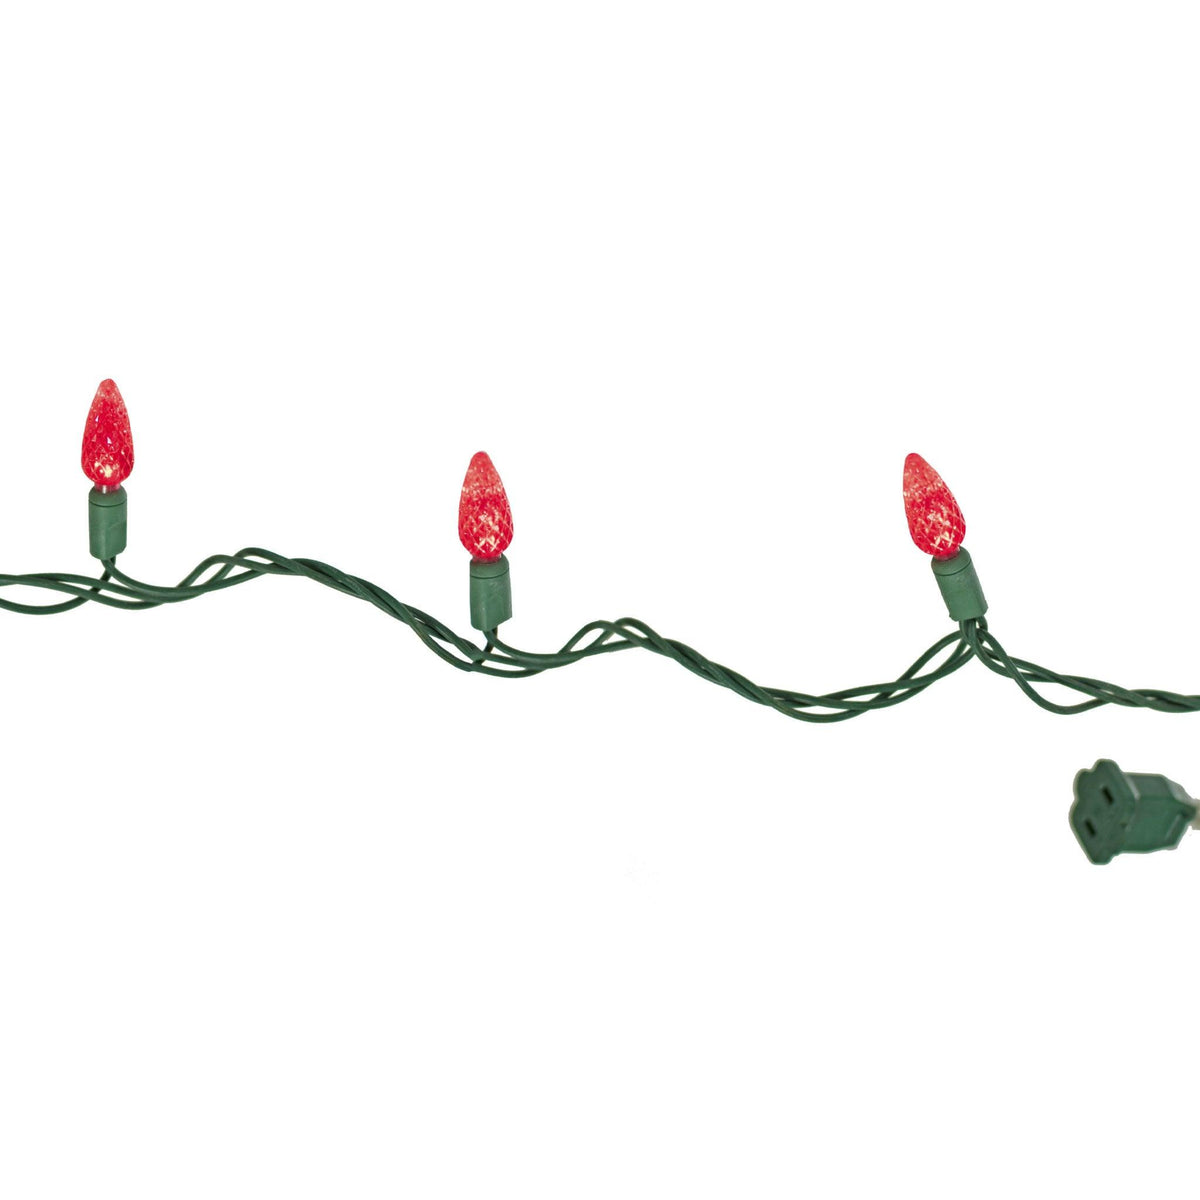 Purchase a brand new set of Lee Display's C6 LED Red Christmas String Lights with Green Wire at leedisplay.com